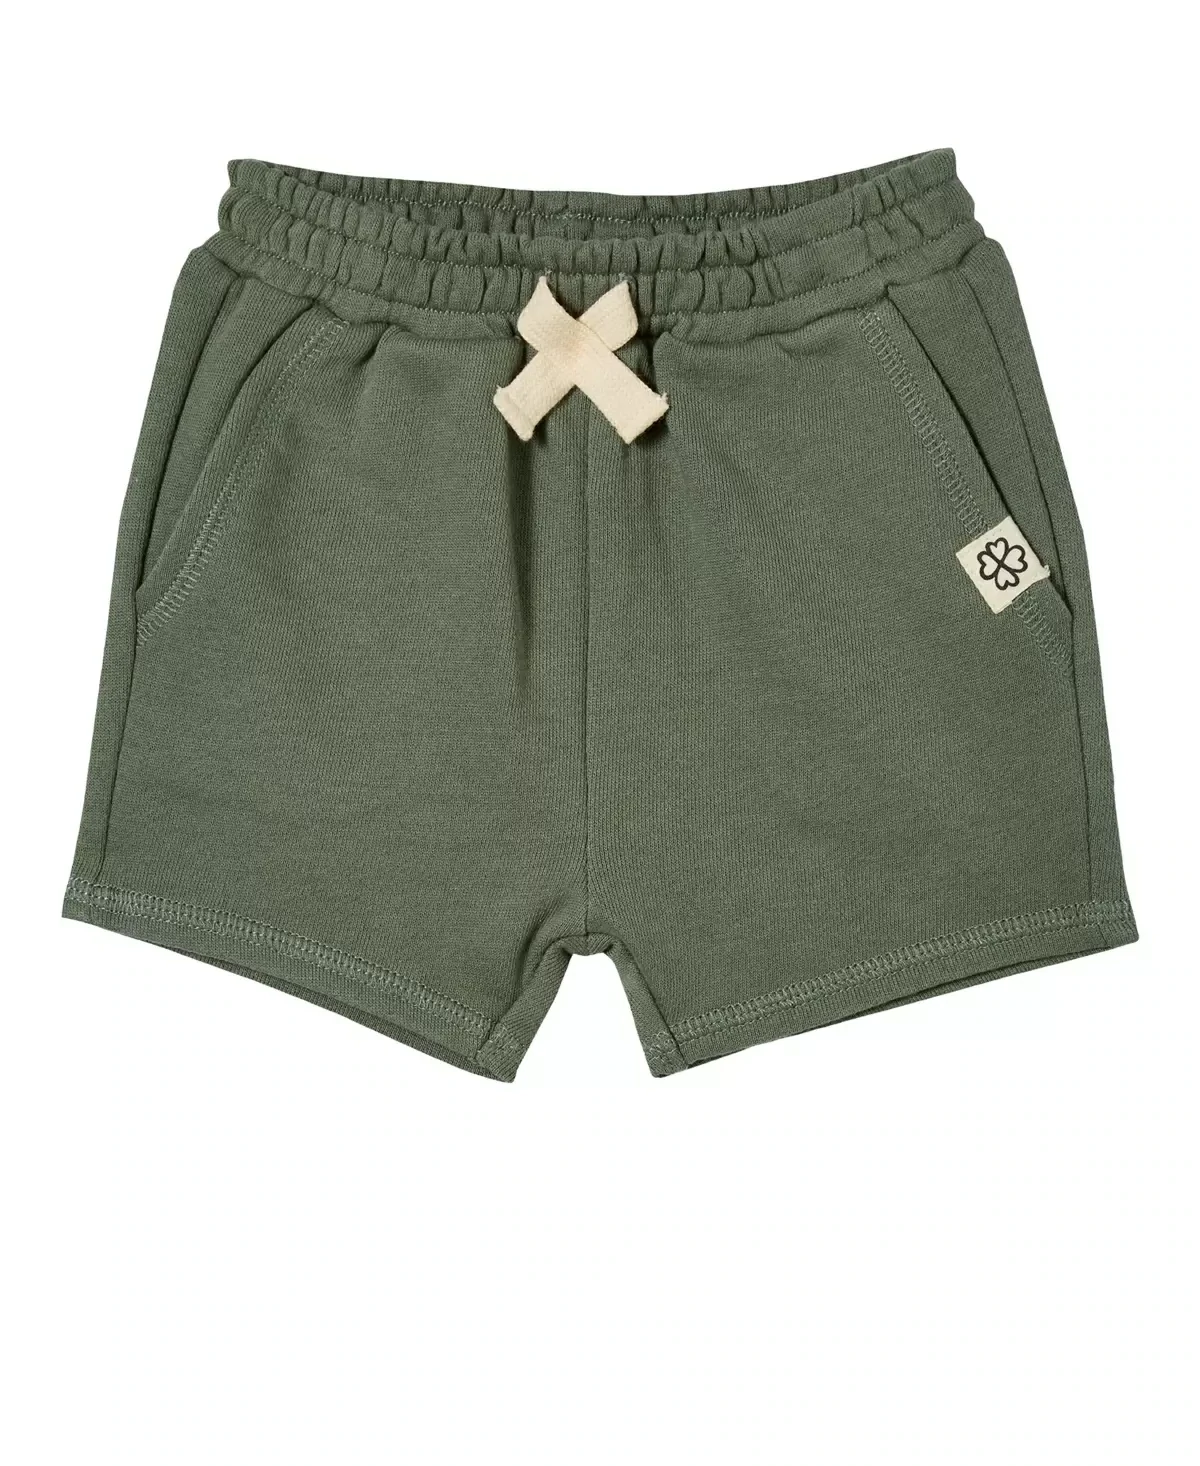 Baby Boys Fleece Shorts - Swag Green - Size 18/24 Months